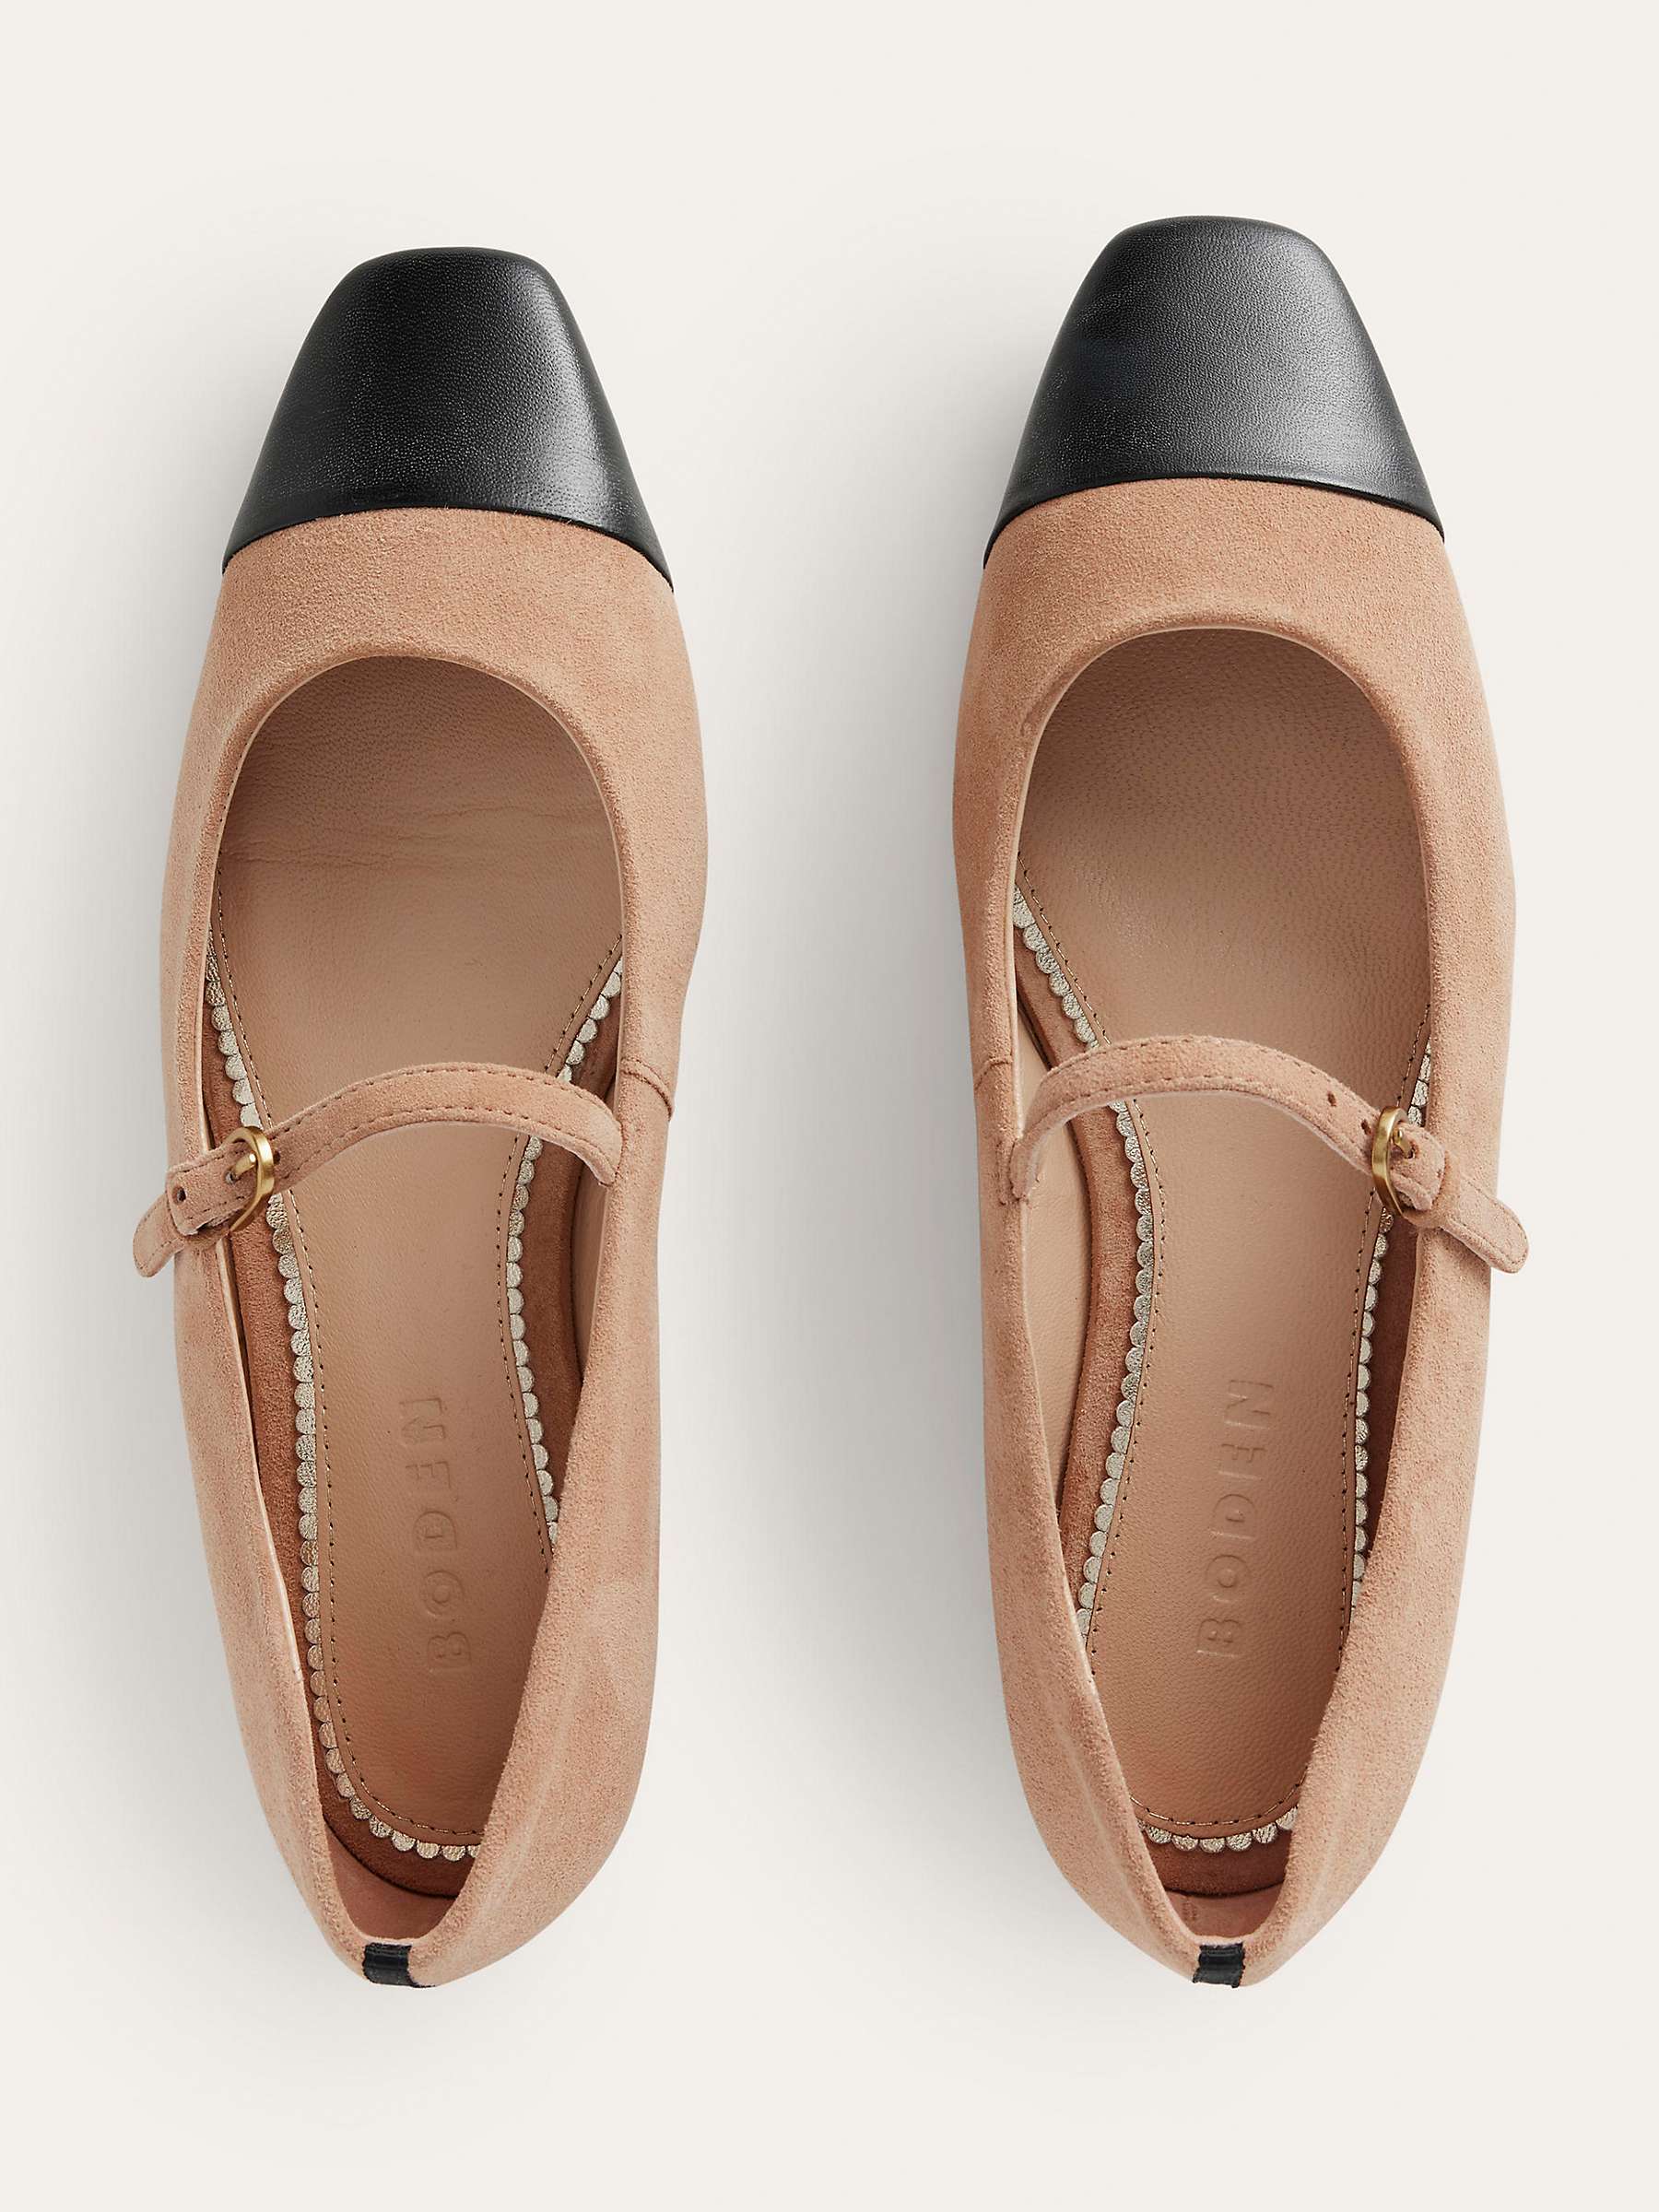 Buy Boden Mary Jane Suede Flats, Macchiato Online at johnlewis.com